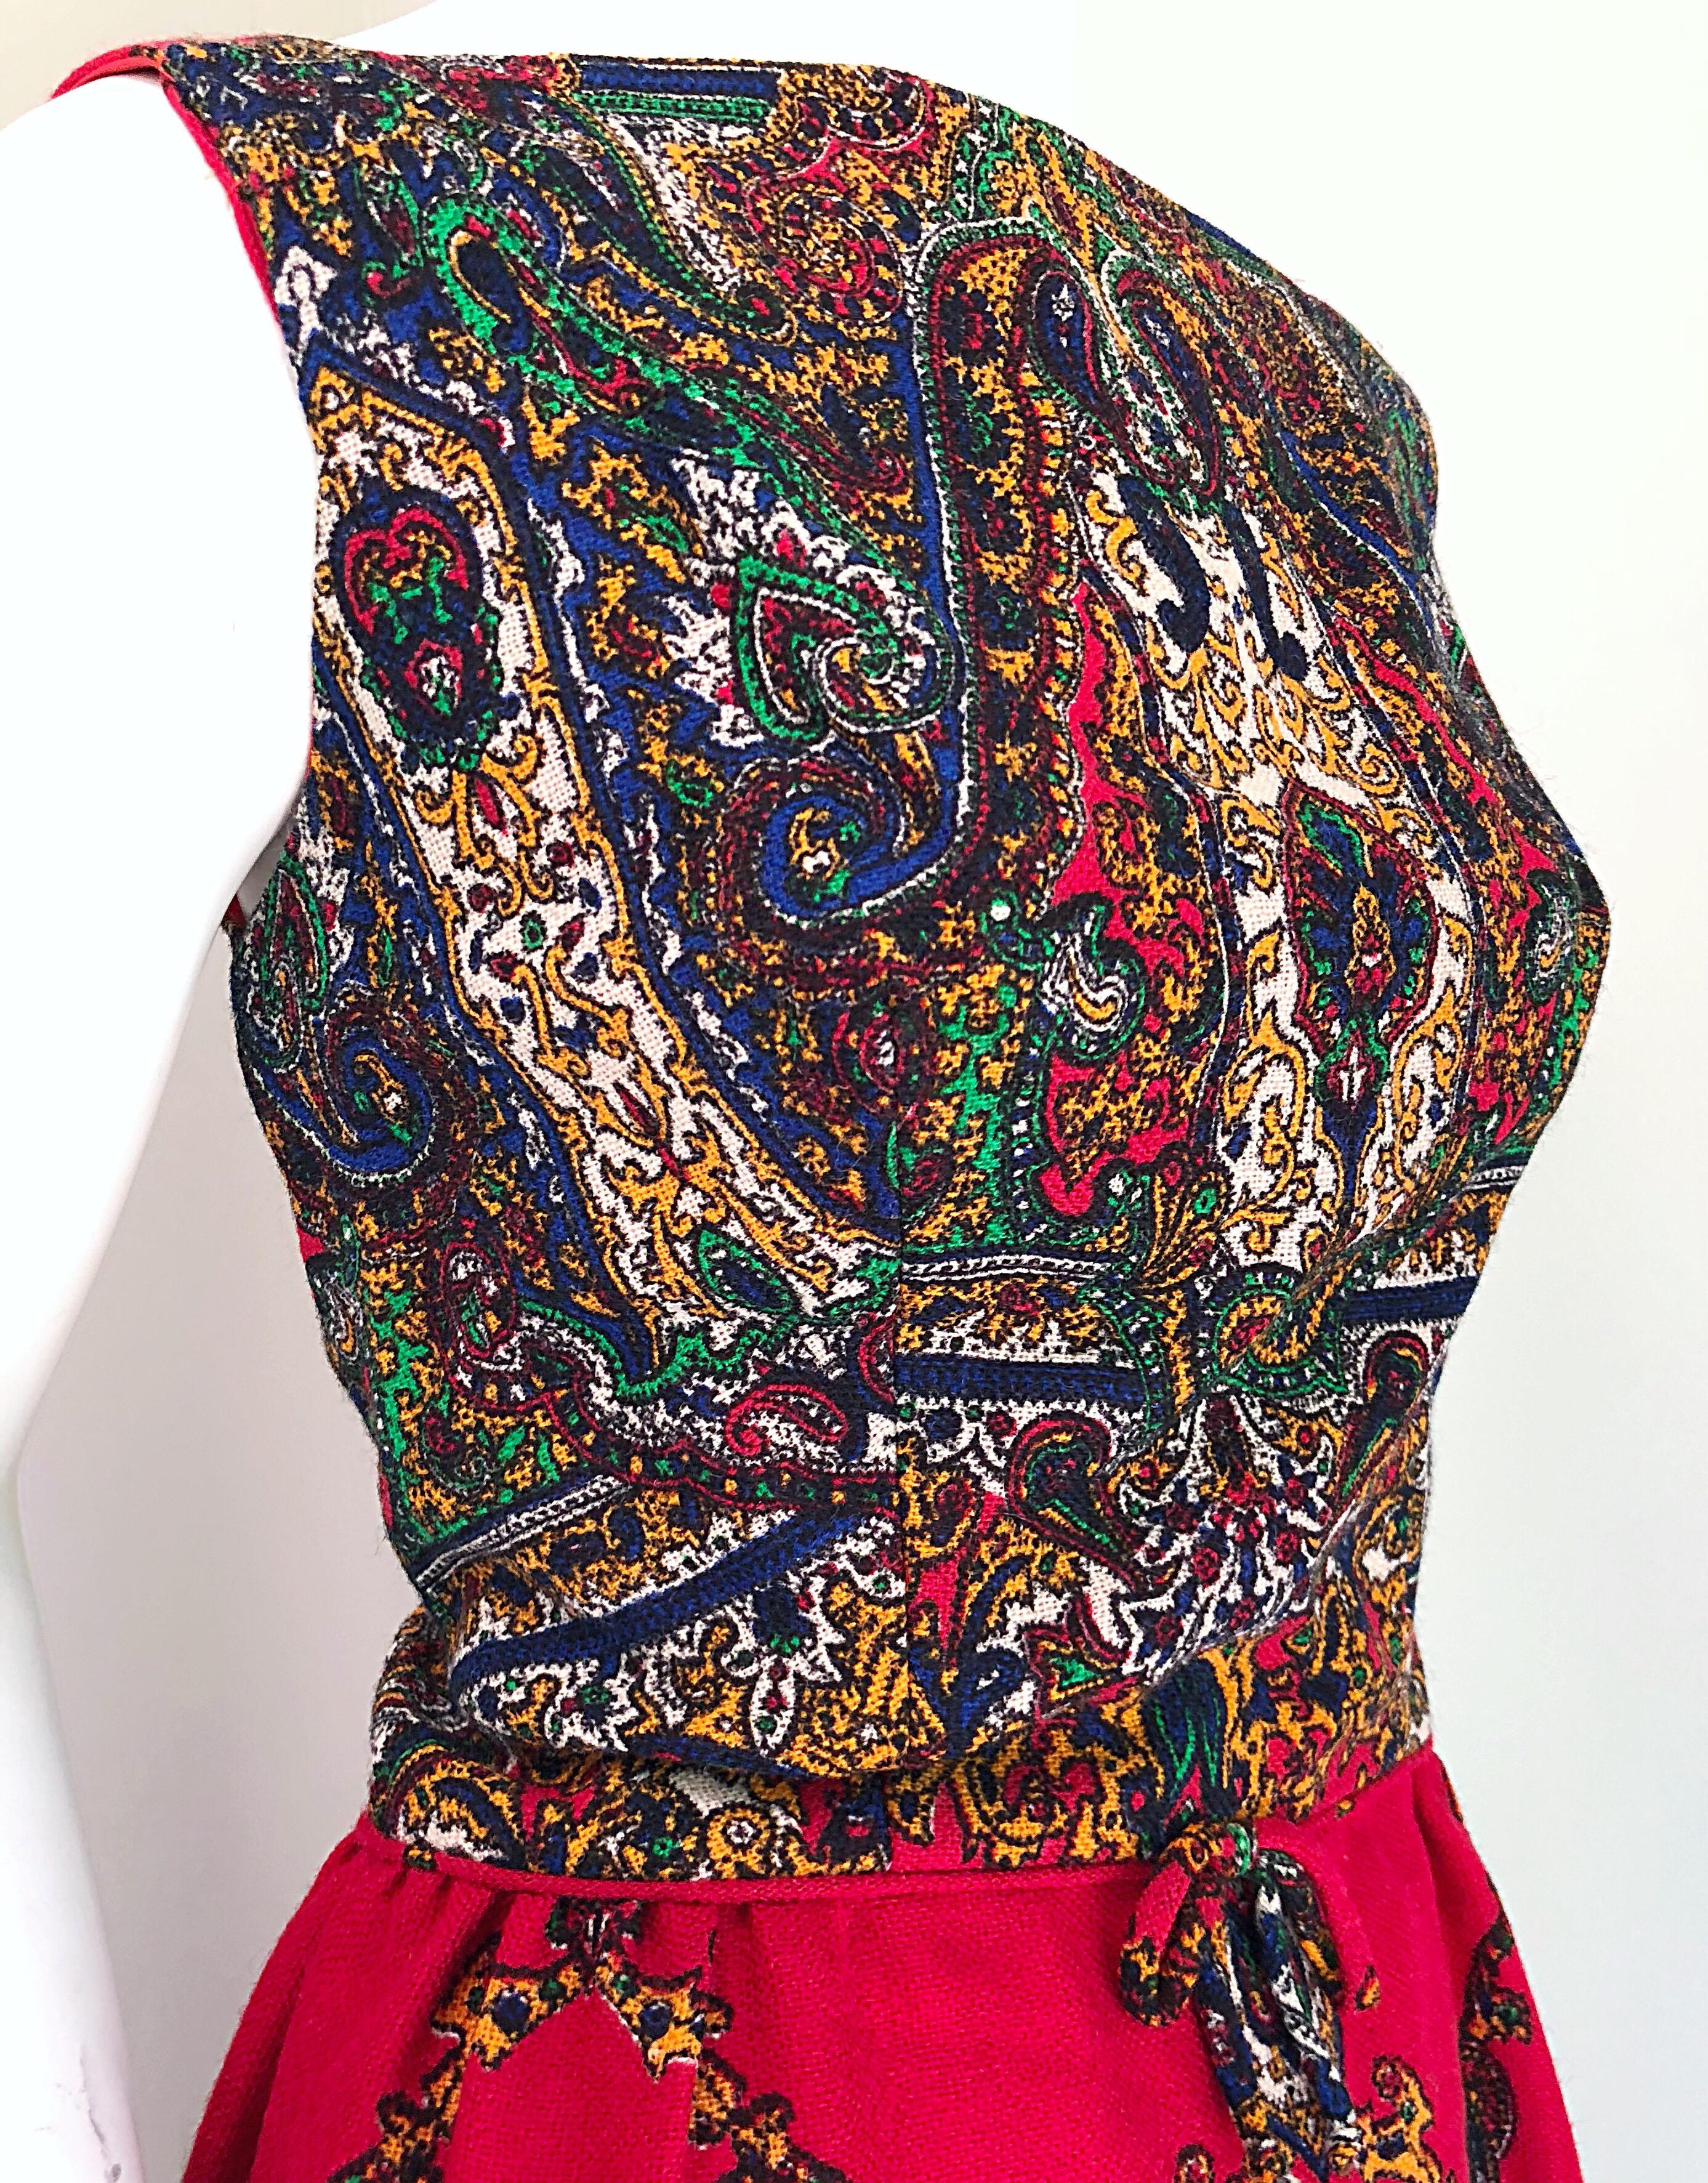 Fantastic Early 1970s Boho Chic Paisley Print Vintage Red 70s Maxi Dress For Sale 1